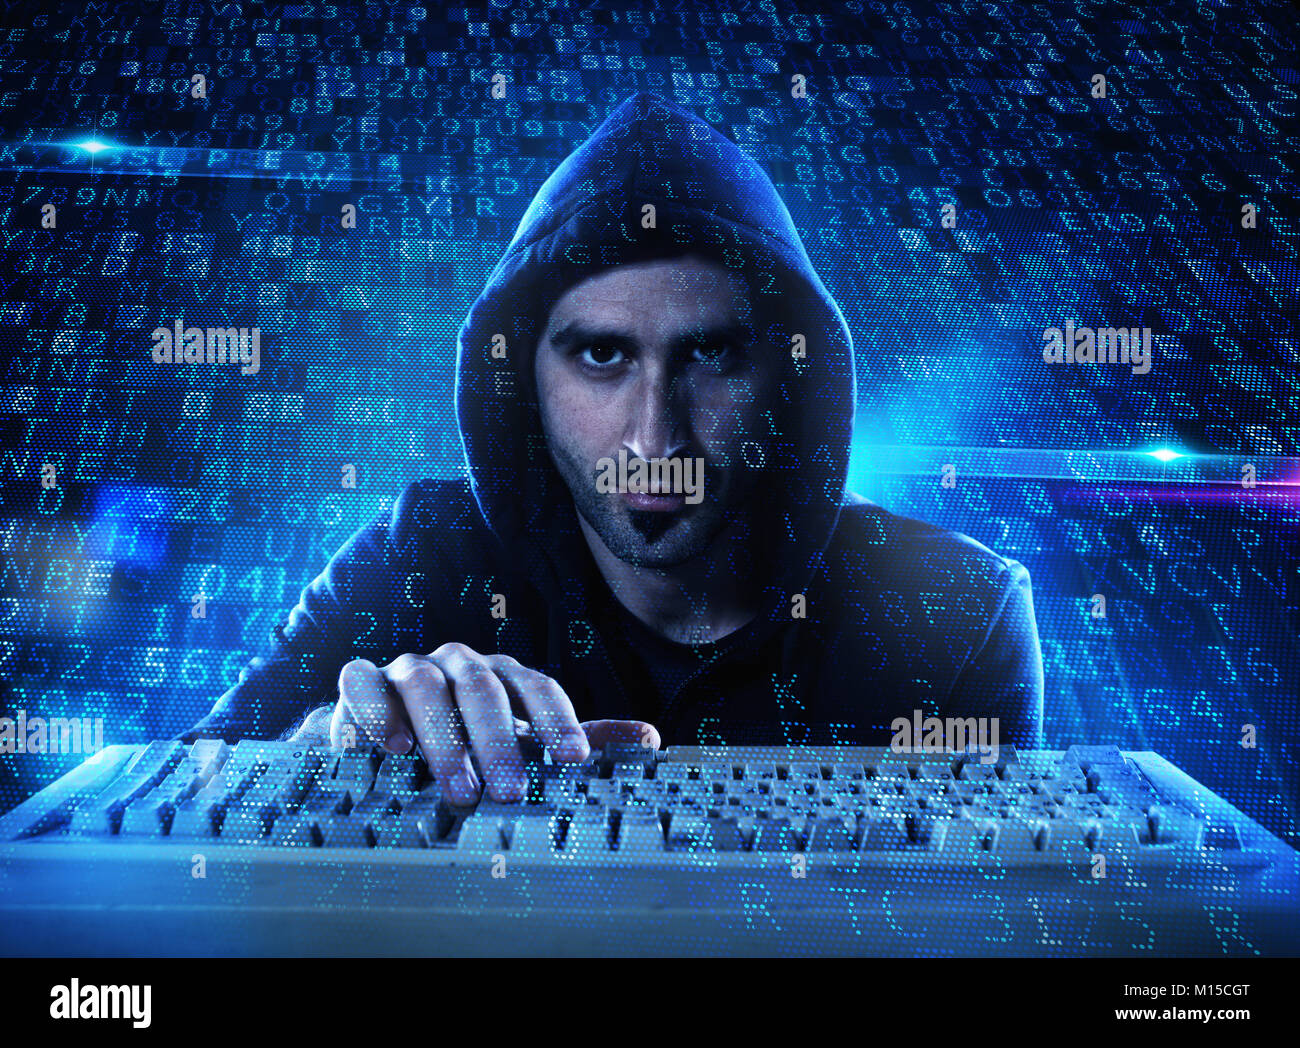 Hacker reading personal information. Concept of privacy and security Stock Photo